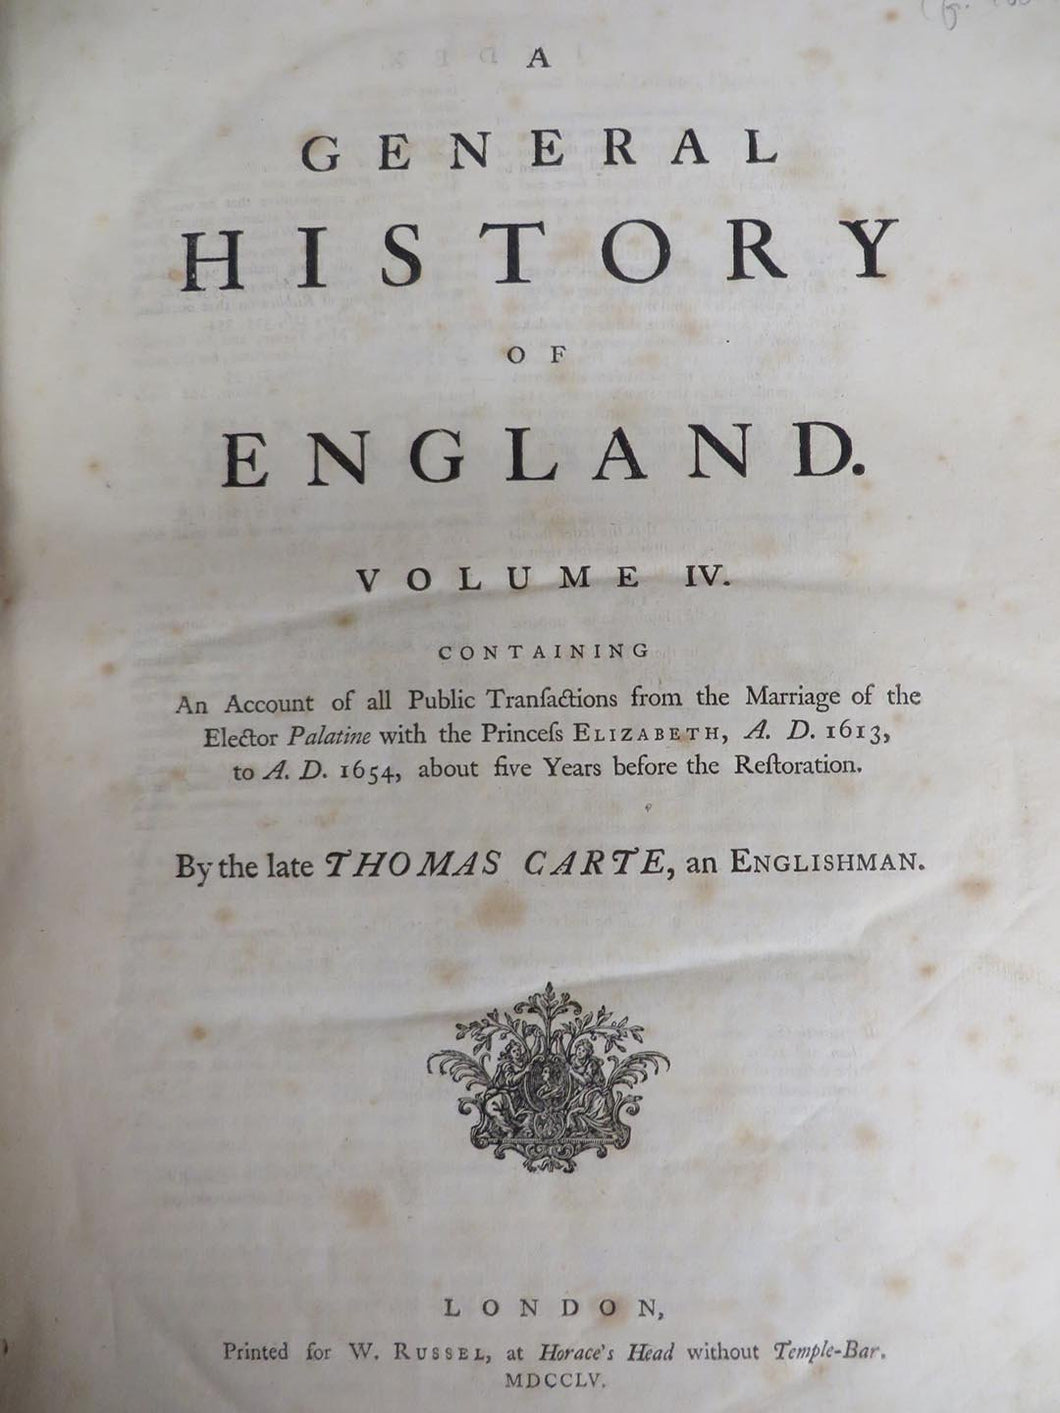 A General History of England Volume IV